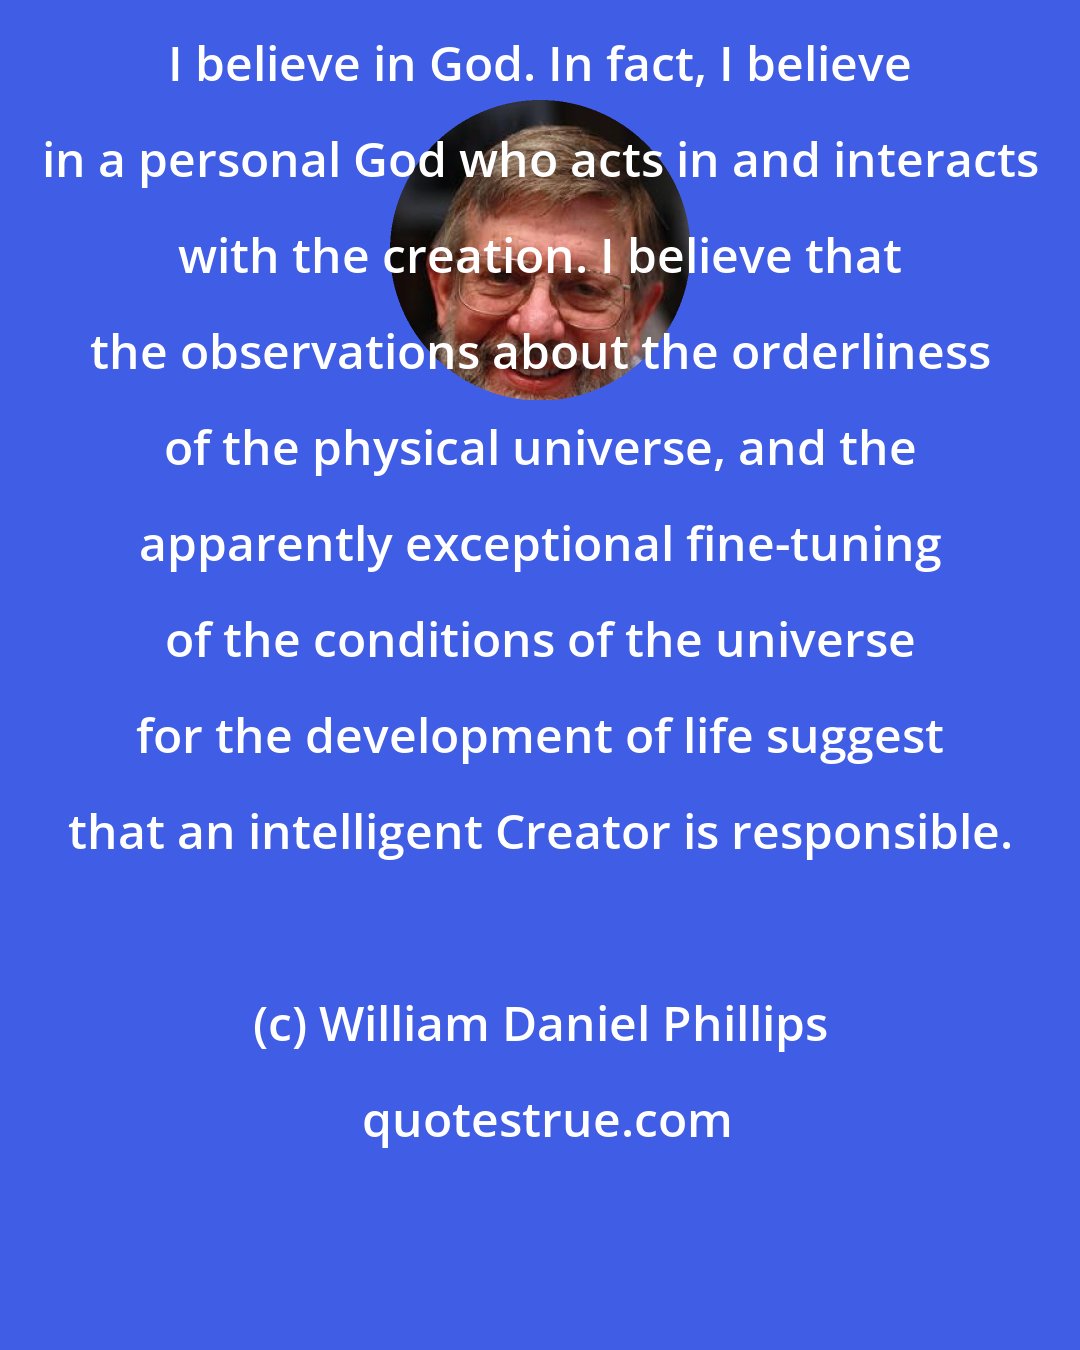 William Daniel Phillips: I believe in God. In fact, I believe in a personal God who acts in and interacts with the creation. I believe that the observations about the orderliness of the physical universe, and the apparently exceptional fine-tuning of the conditions of the universe for the development of life suggest that an intelligent Creator is responsible.